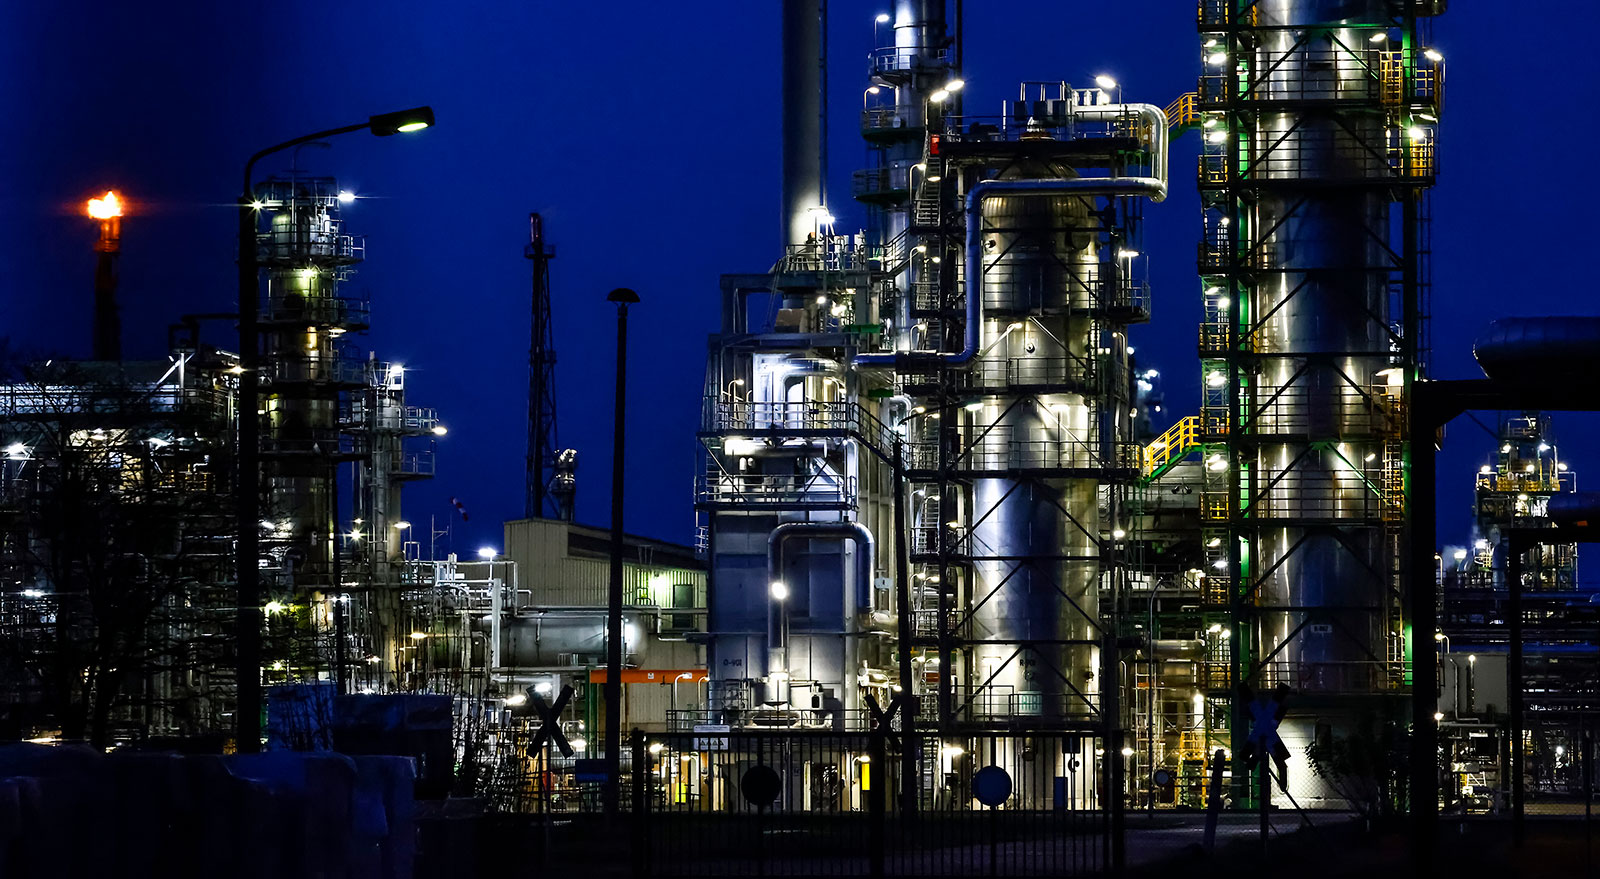 The PCK oil refinery, which is majority owned by Russian energy company Rosneft, stands on April 30 in Schwedt, Germany.